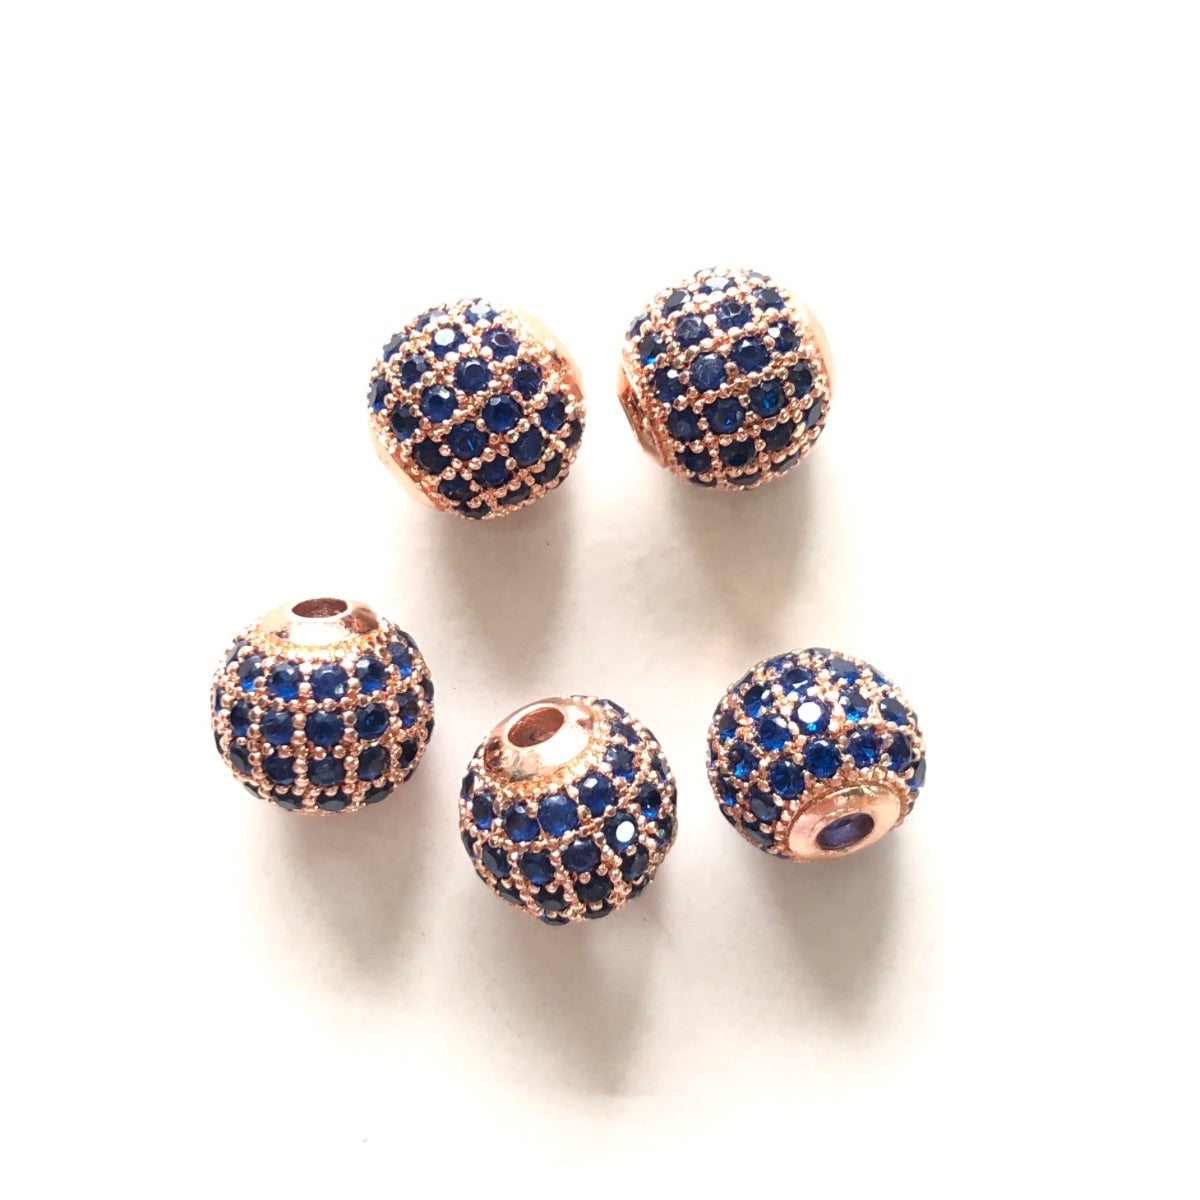 10pcs/lot 6mm, 8mm Colorful CZ Paved Ball Spacers Rose Gold Blue CZ Paved Spacers 6mm Beads 8mm Beads Ball Beads Colorful Zirconia New Spacers Arrivals Charms Beads Beyond